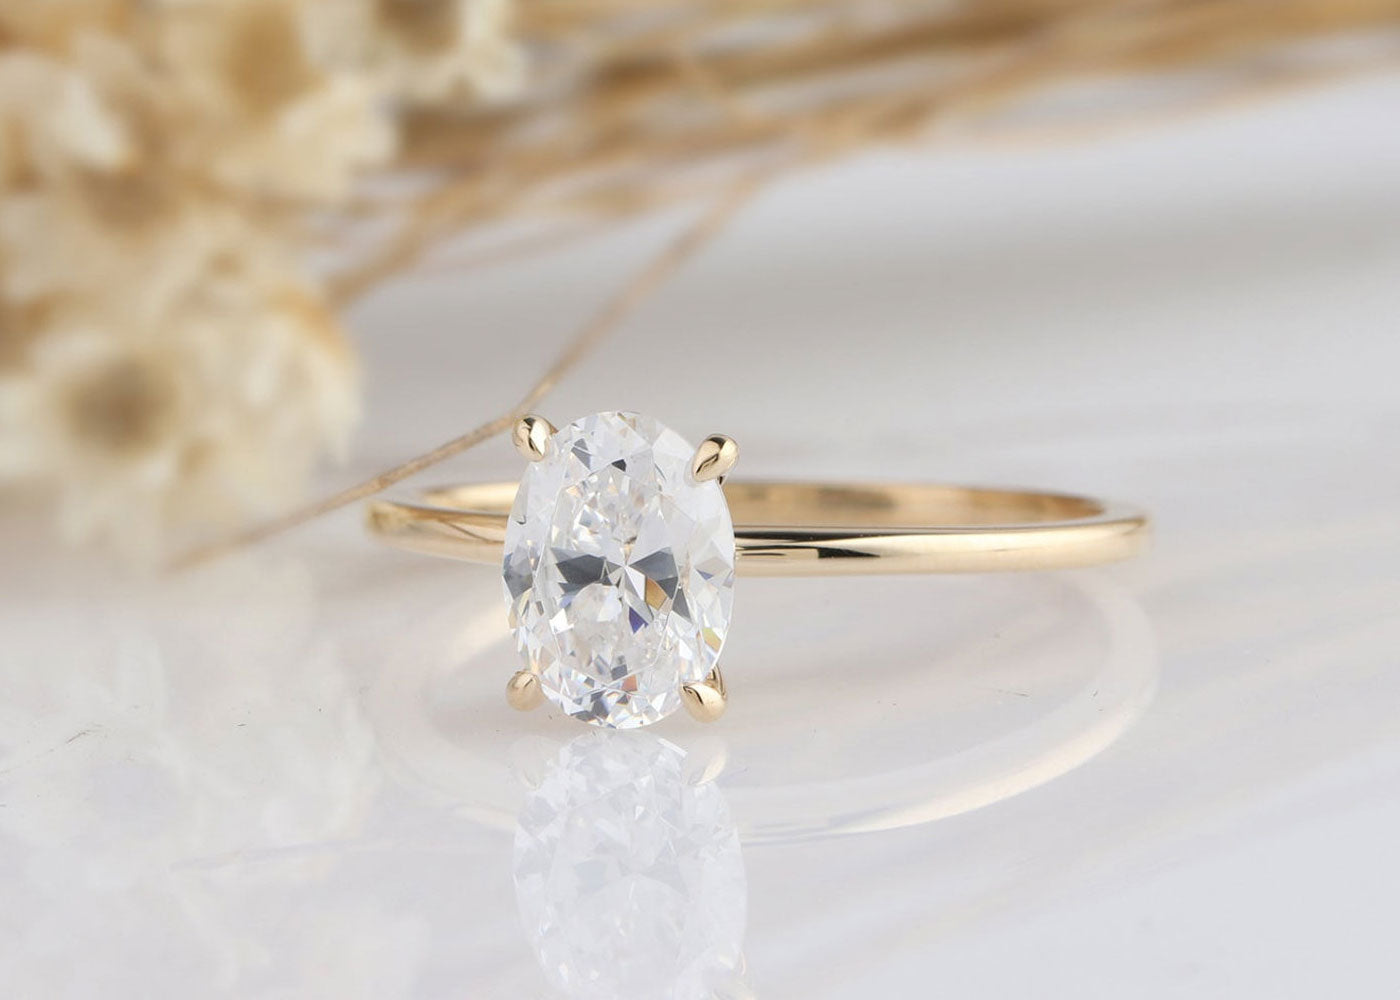 Why Choose Moissanite Over Diamond for Your Engagement Ring